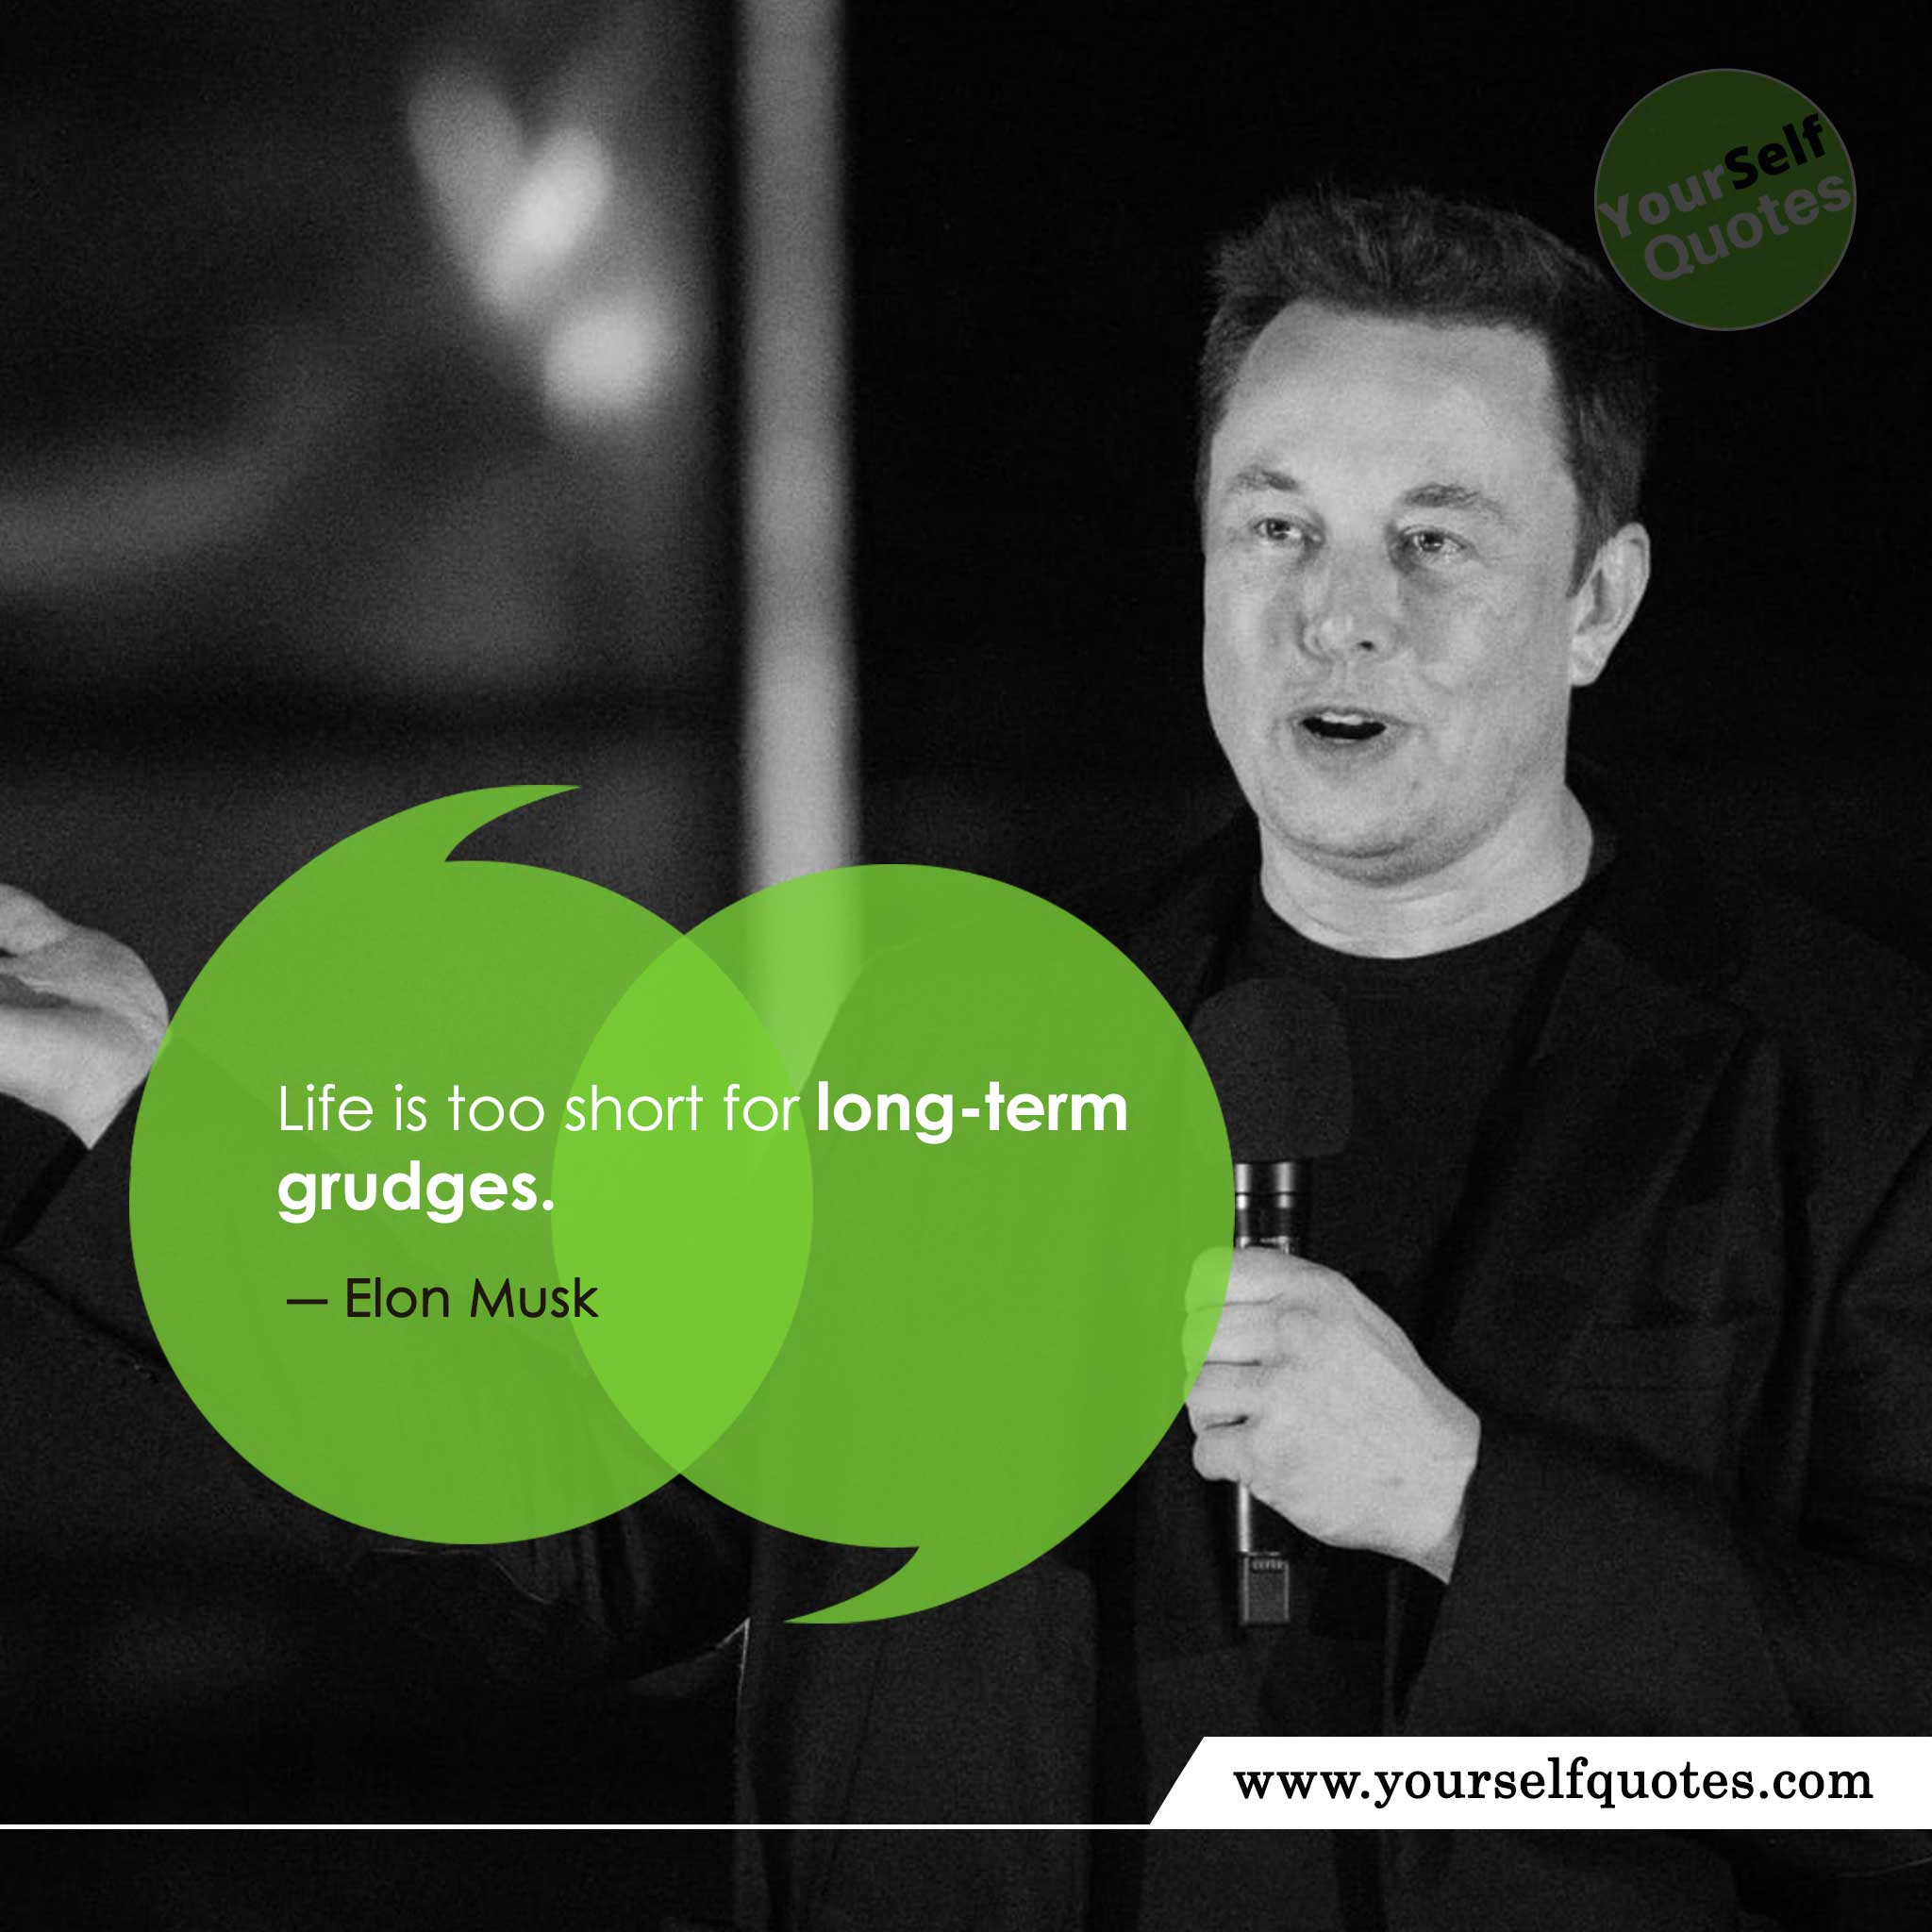 Elon Musk Quotes on Life